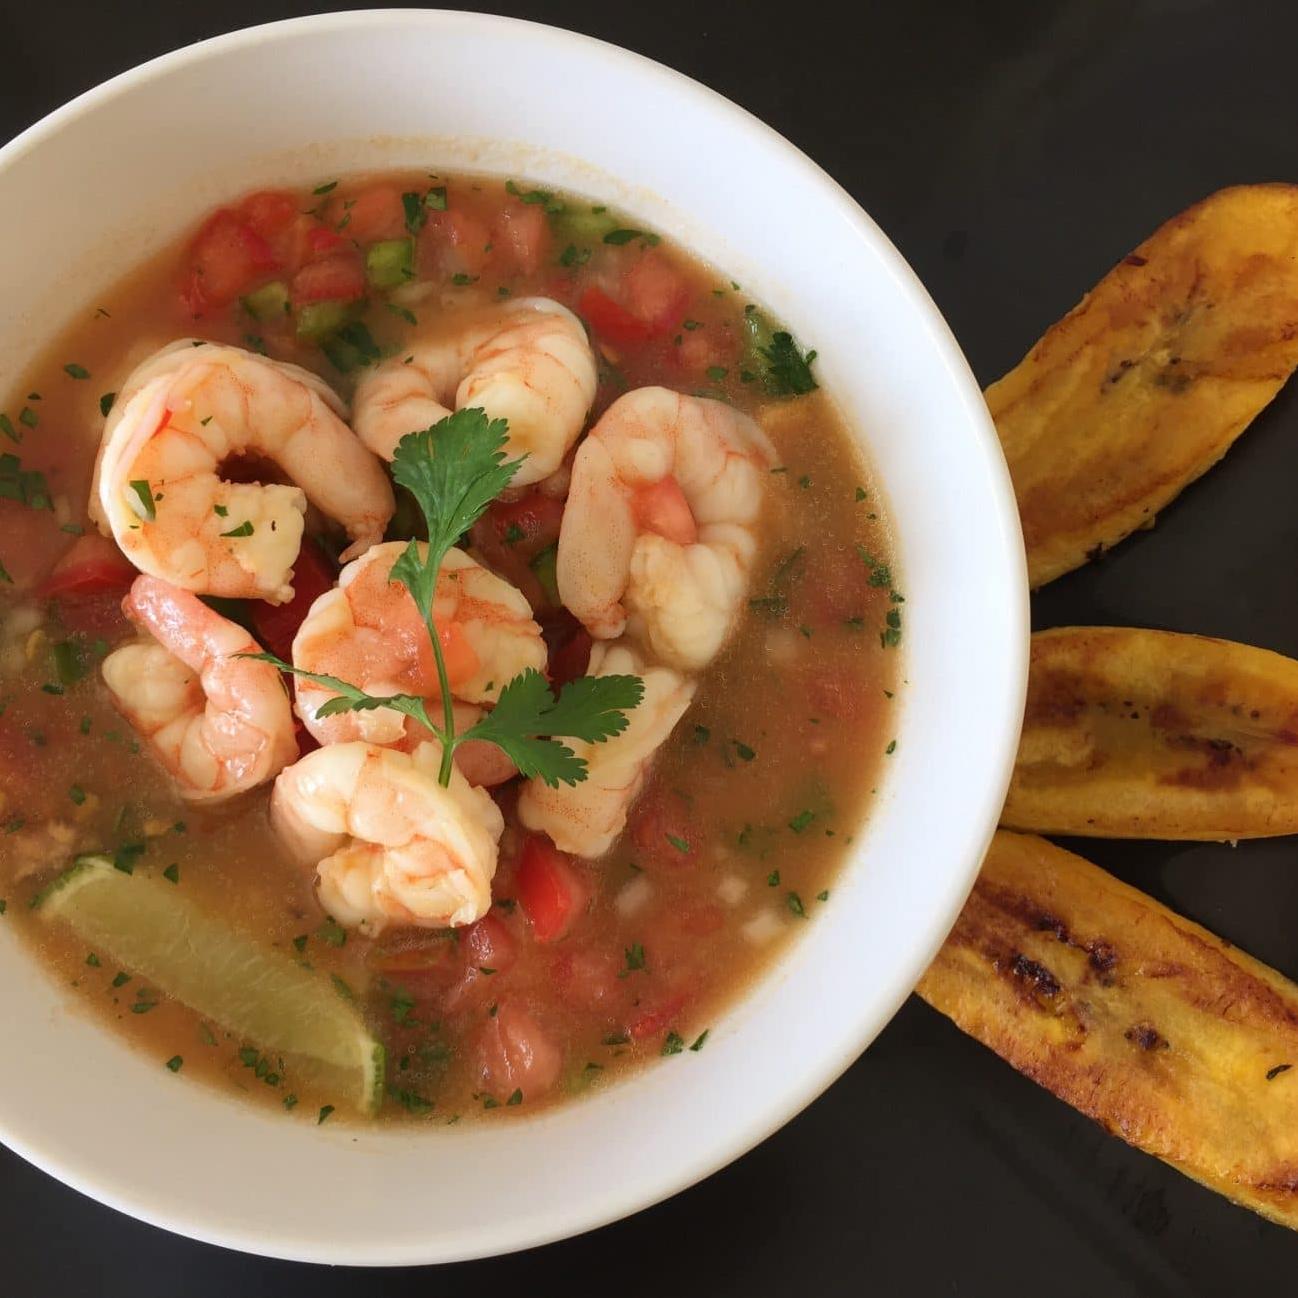  A refreshing and citrusy Ecuadorean ceviche to brighten up any meal!